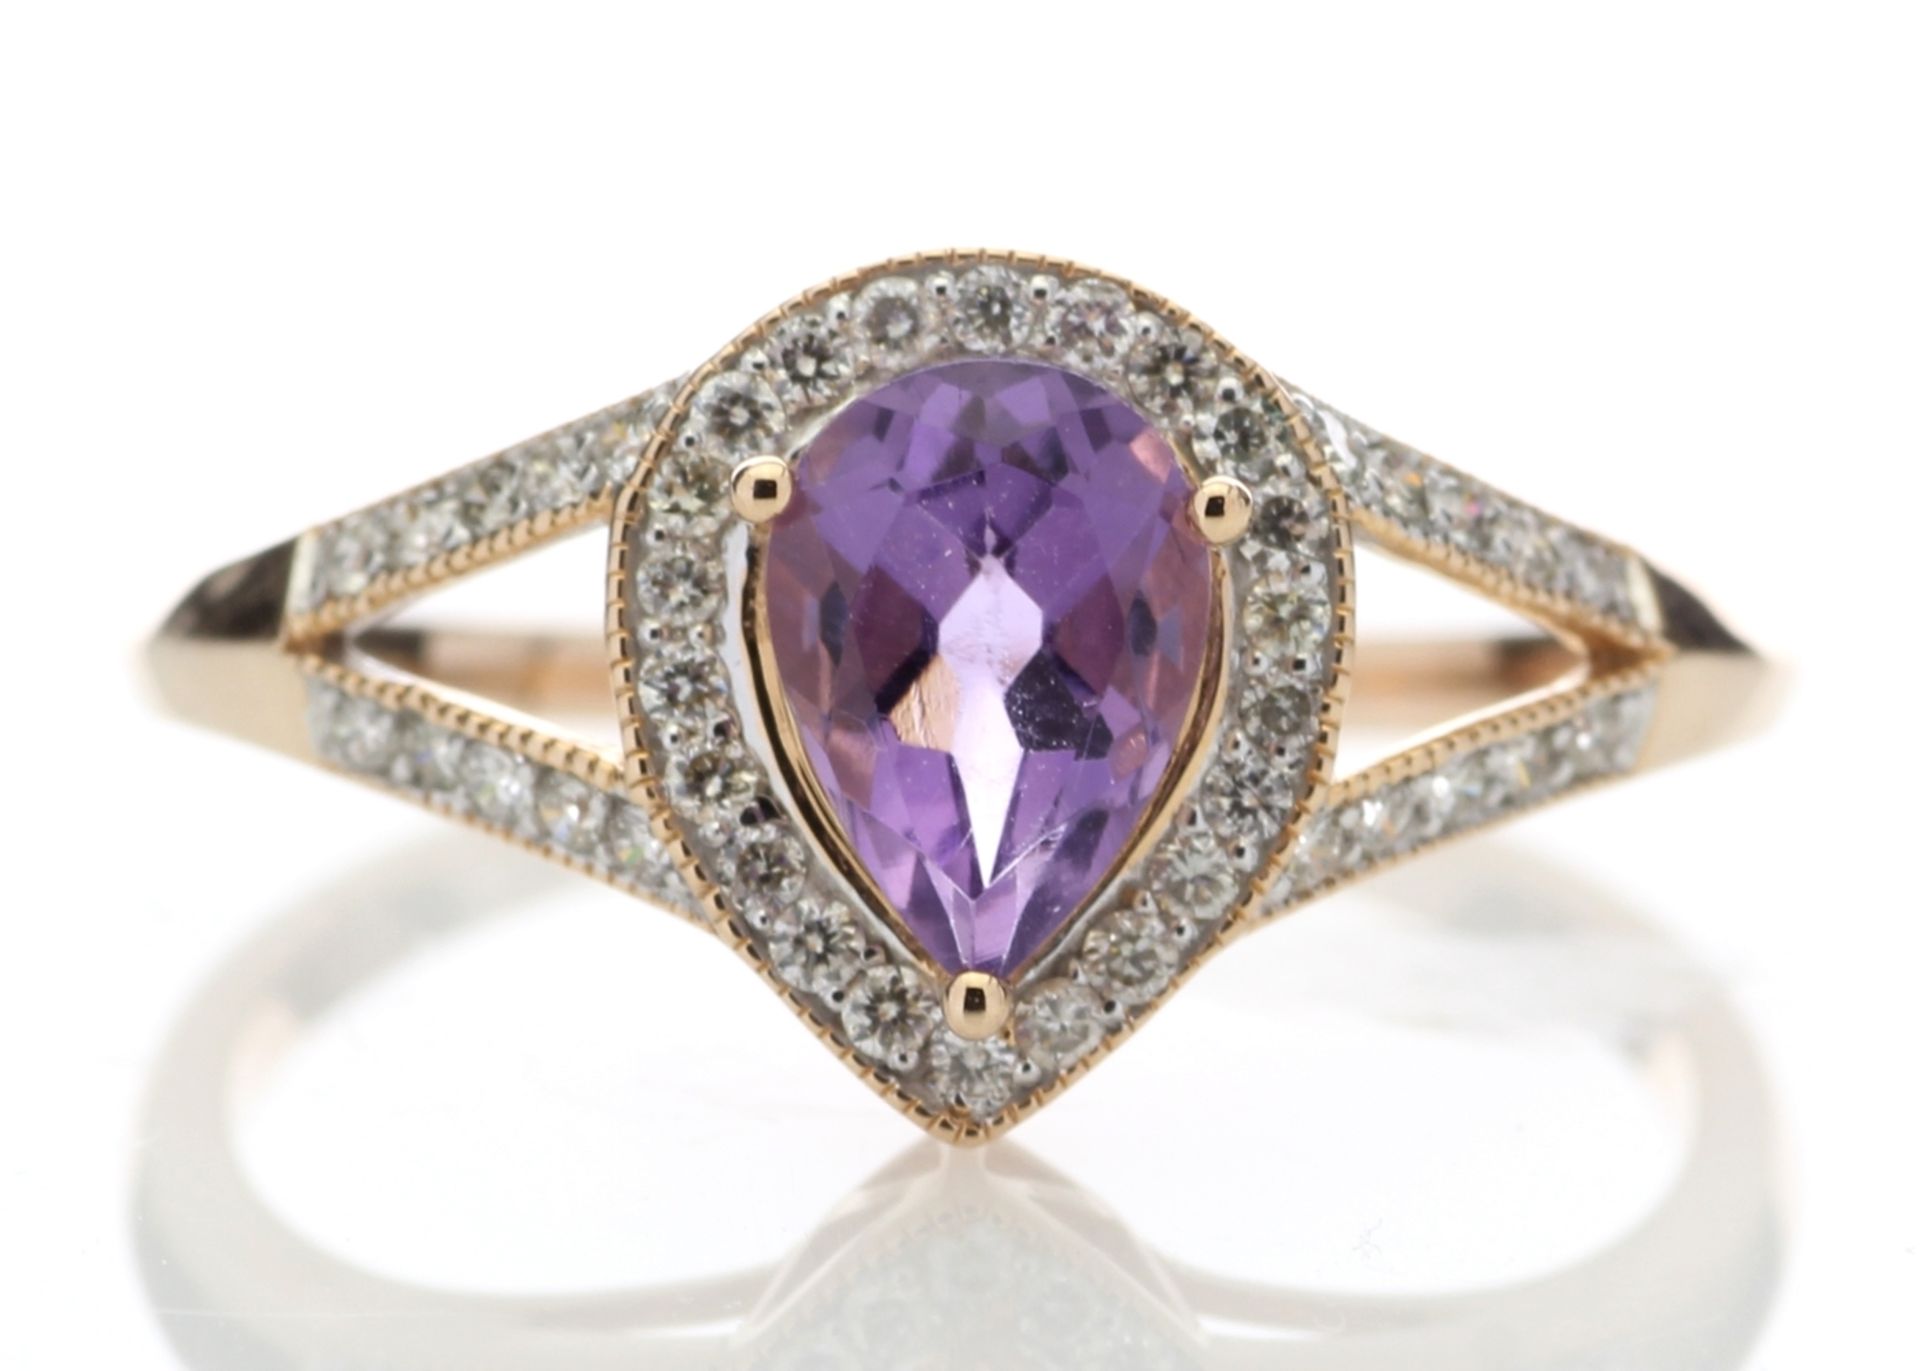 9ct Rose Gold Amethyst And Diamond Cluster Ring 0.21 Carats - Valued by GIE £2,442.00 - 9ct Rose